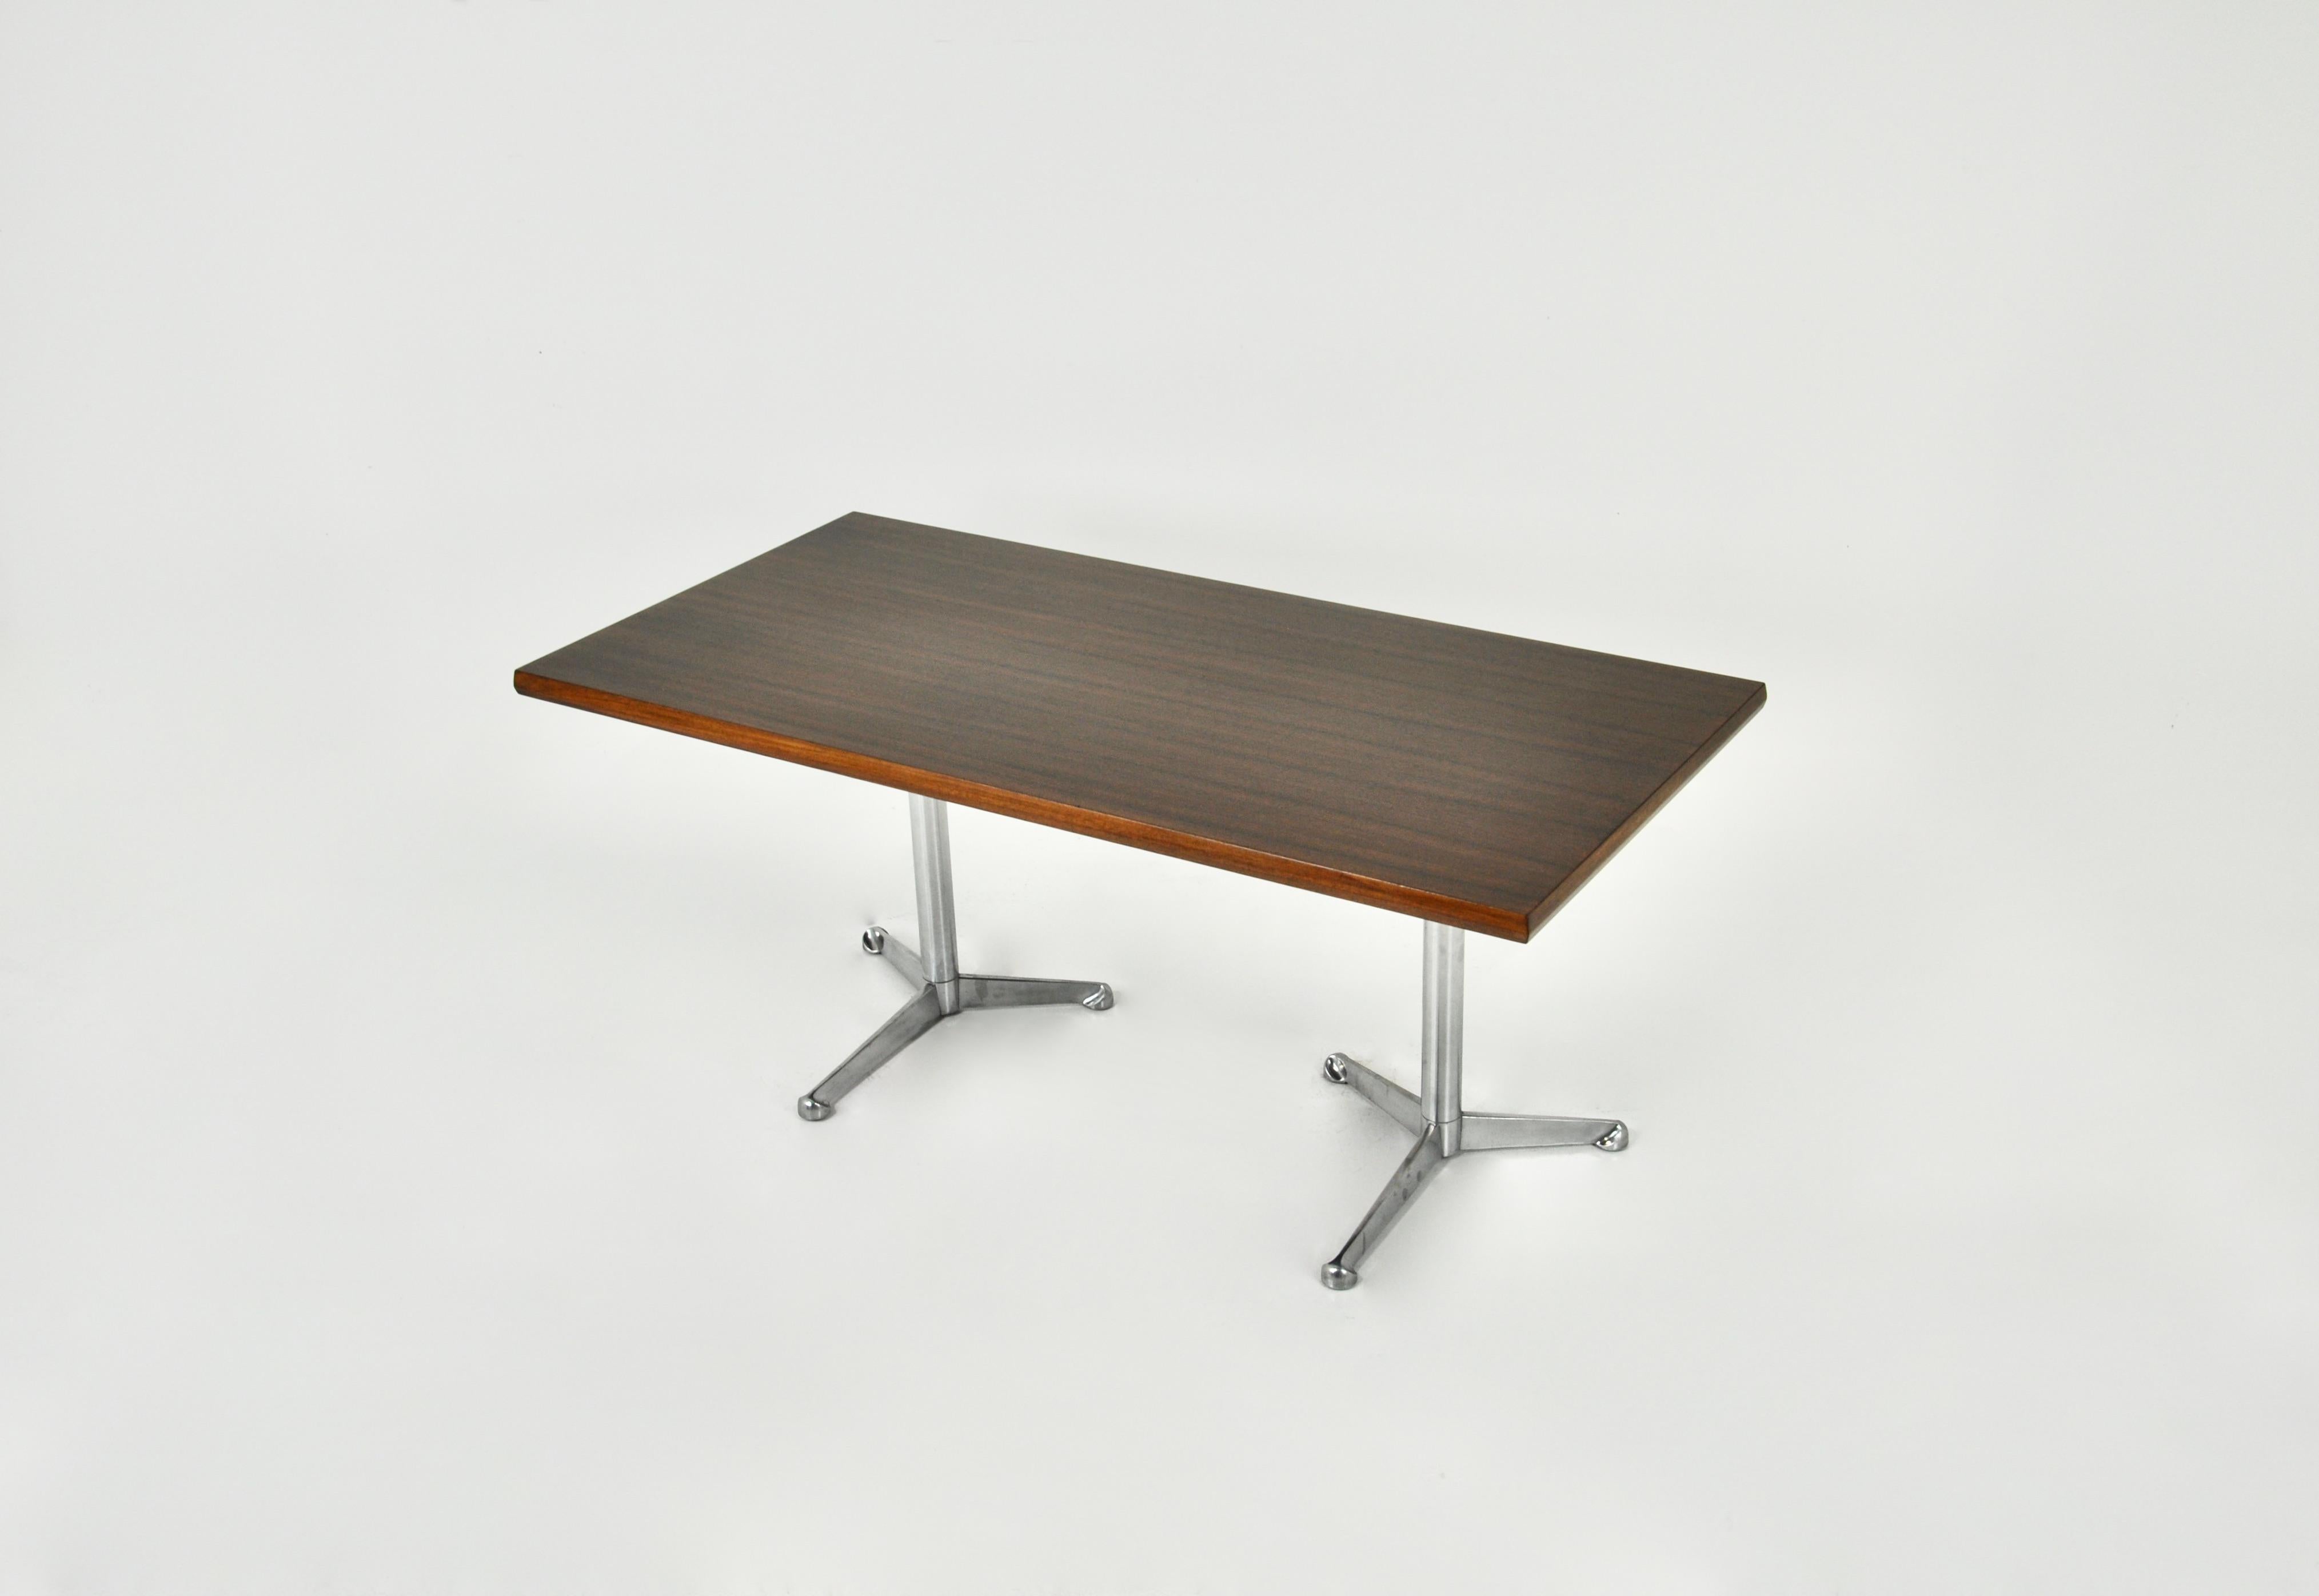 Desk with wood and metal leg. Stamped Tecno.  Wear due to time and age of the desk.